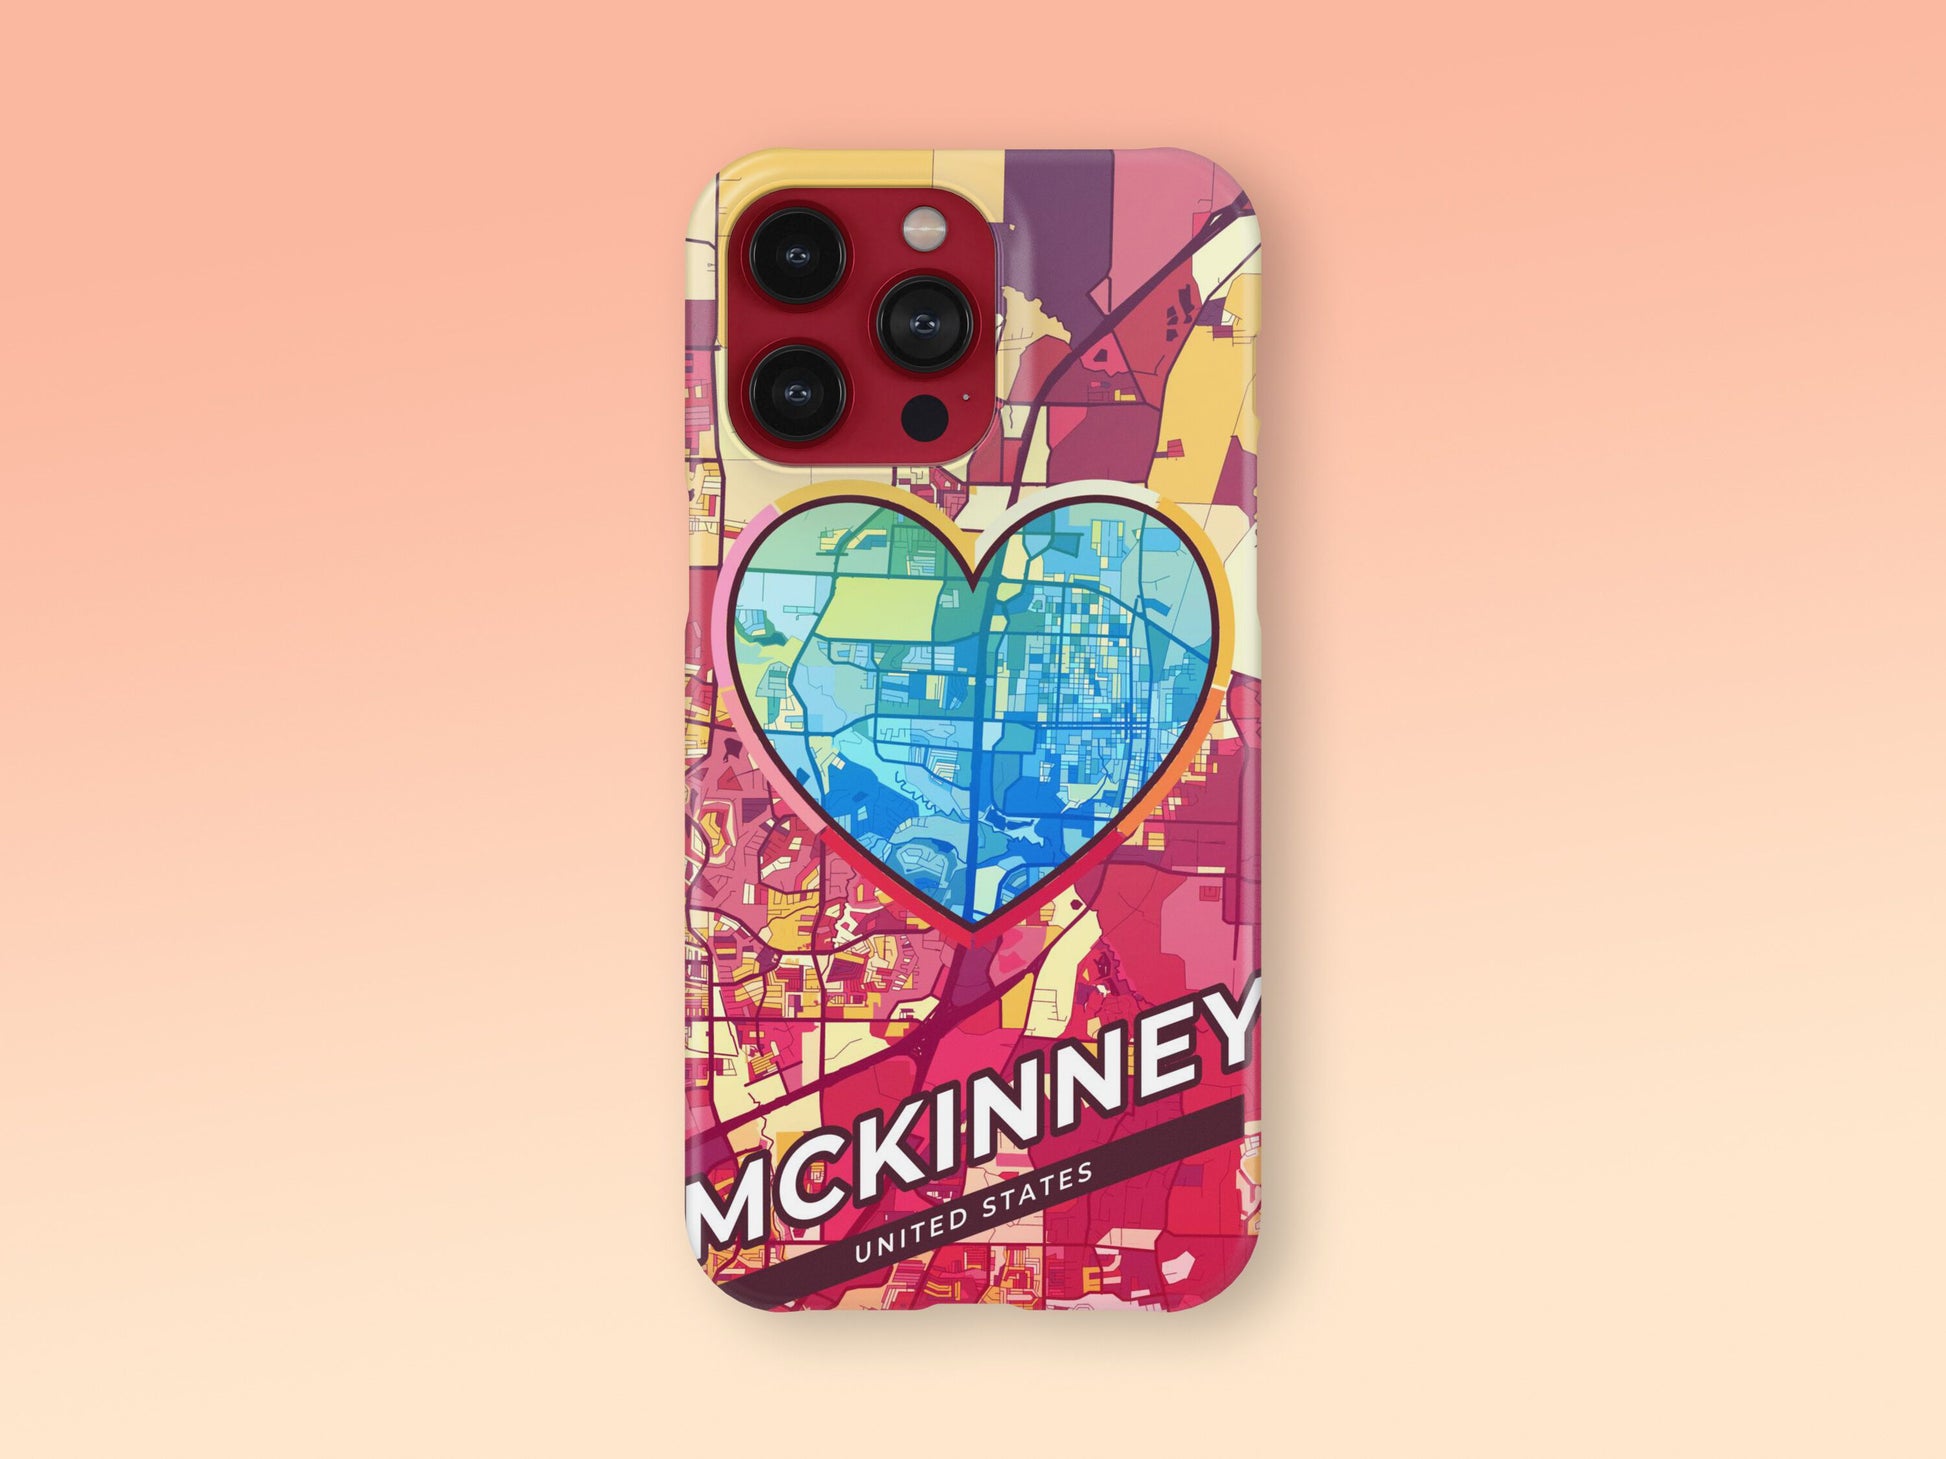 Mckinney Texas slim phone case with colorful icon. Birthday, wedding or housewarming gift. Couple match cases. 2